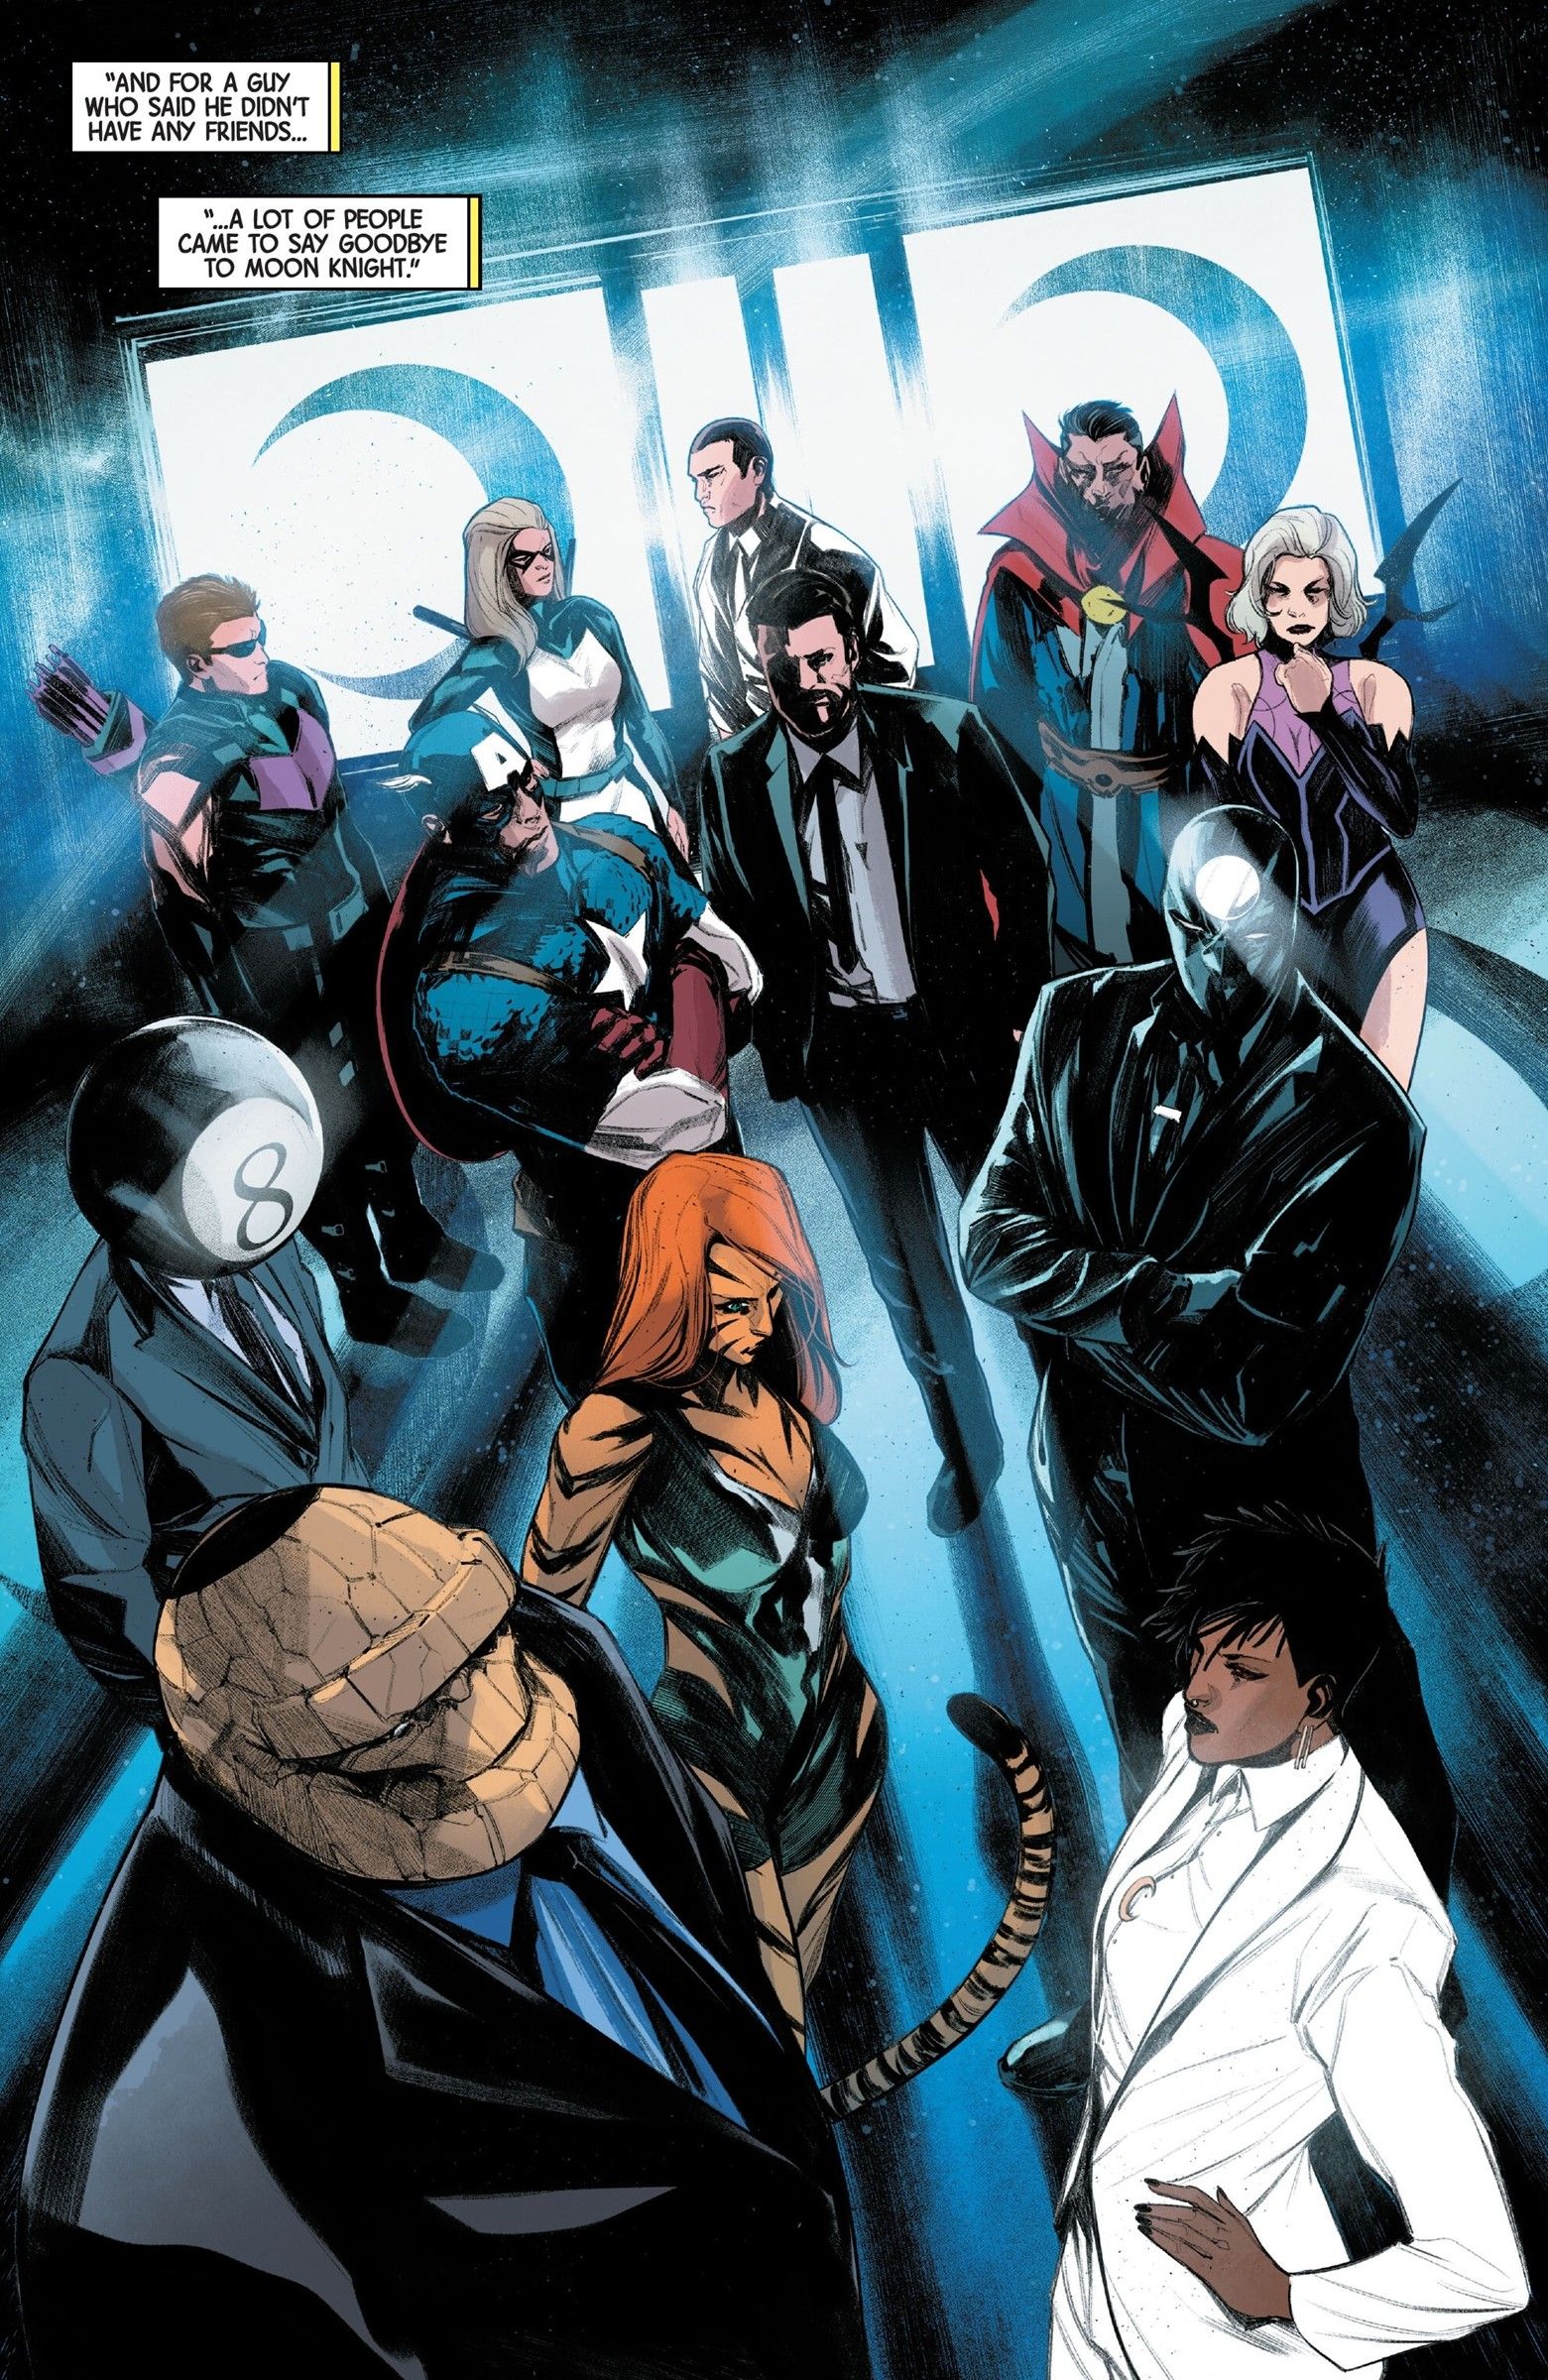 A group of heroes, including the Thing, Doctor Strange, Clea and Tigra attend Moon Knight's funeral.